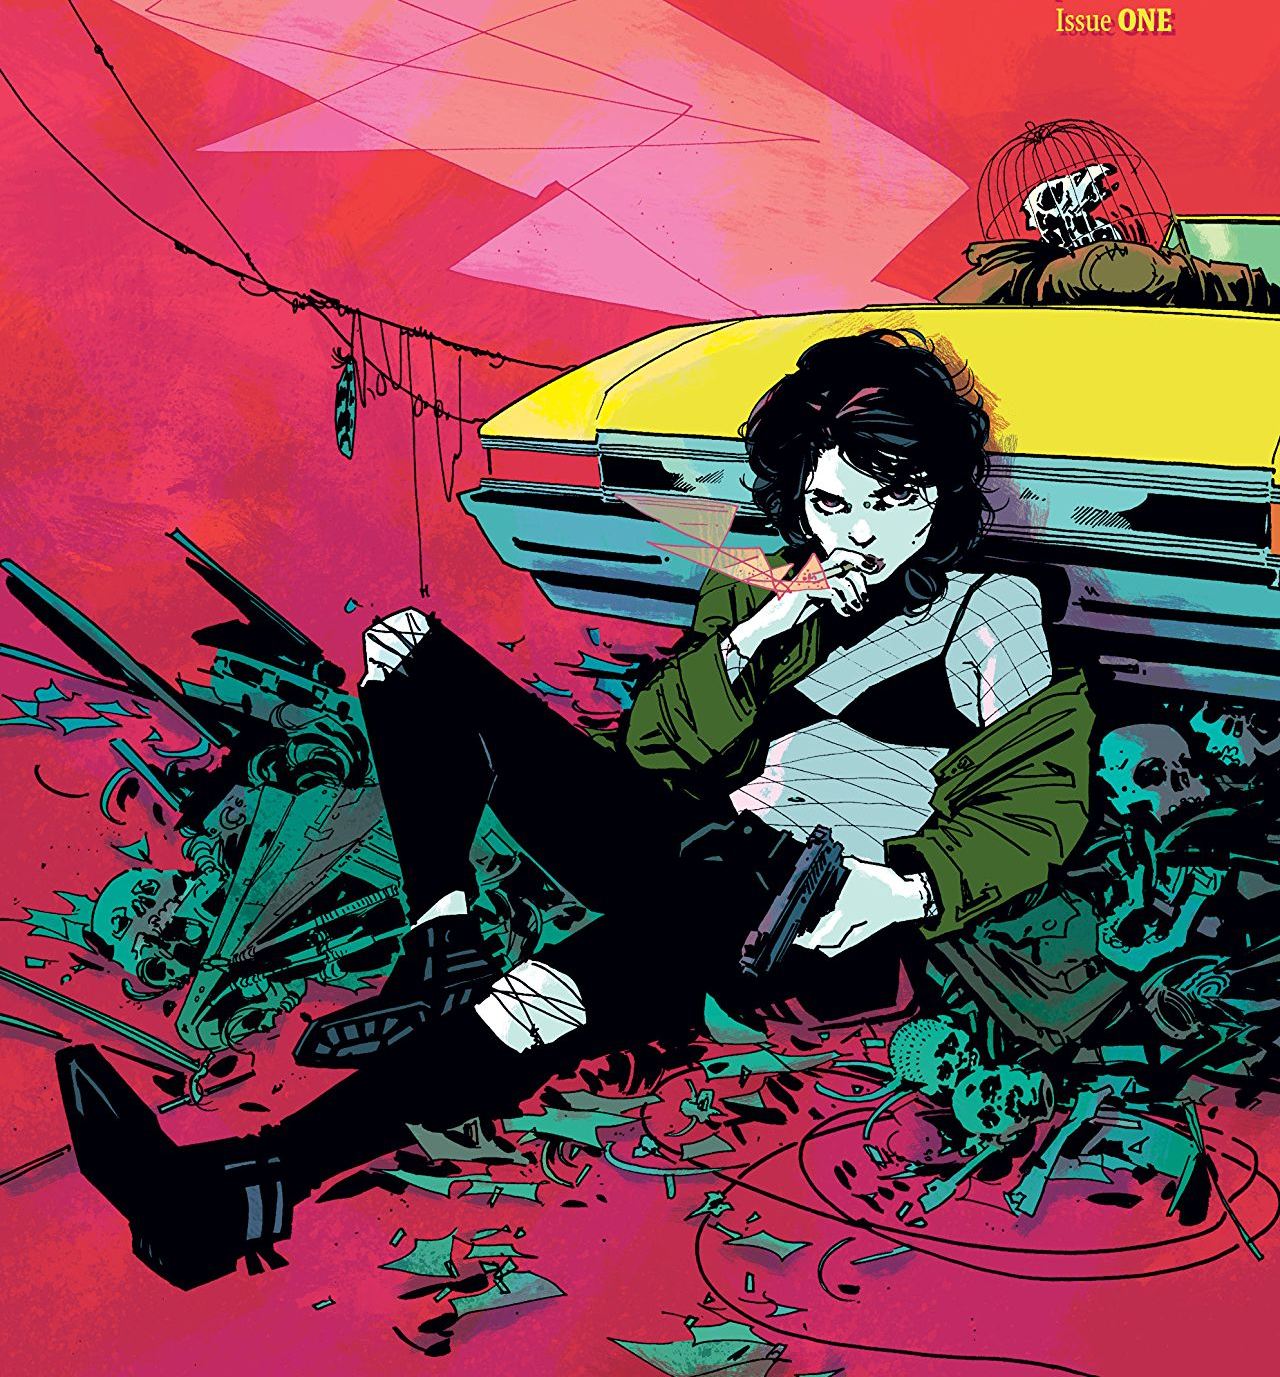 Coffin Bound #1 review: a surreal start